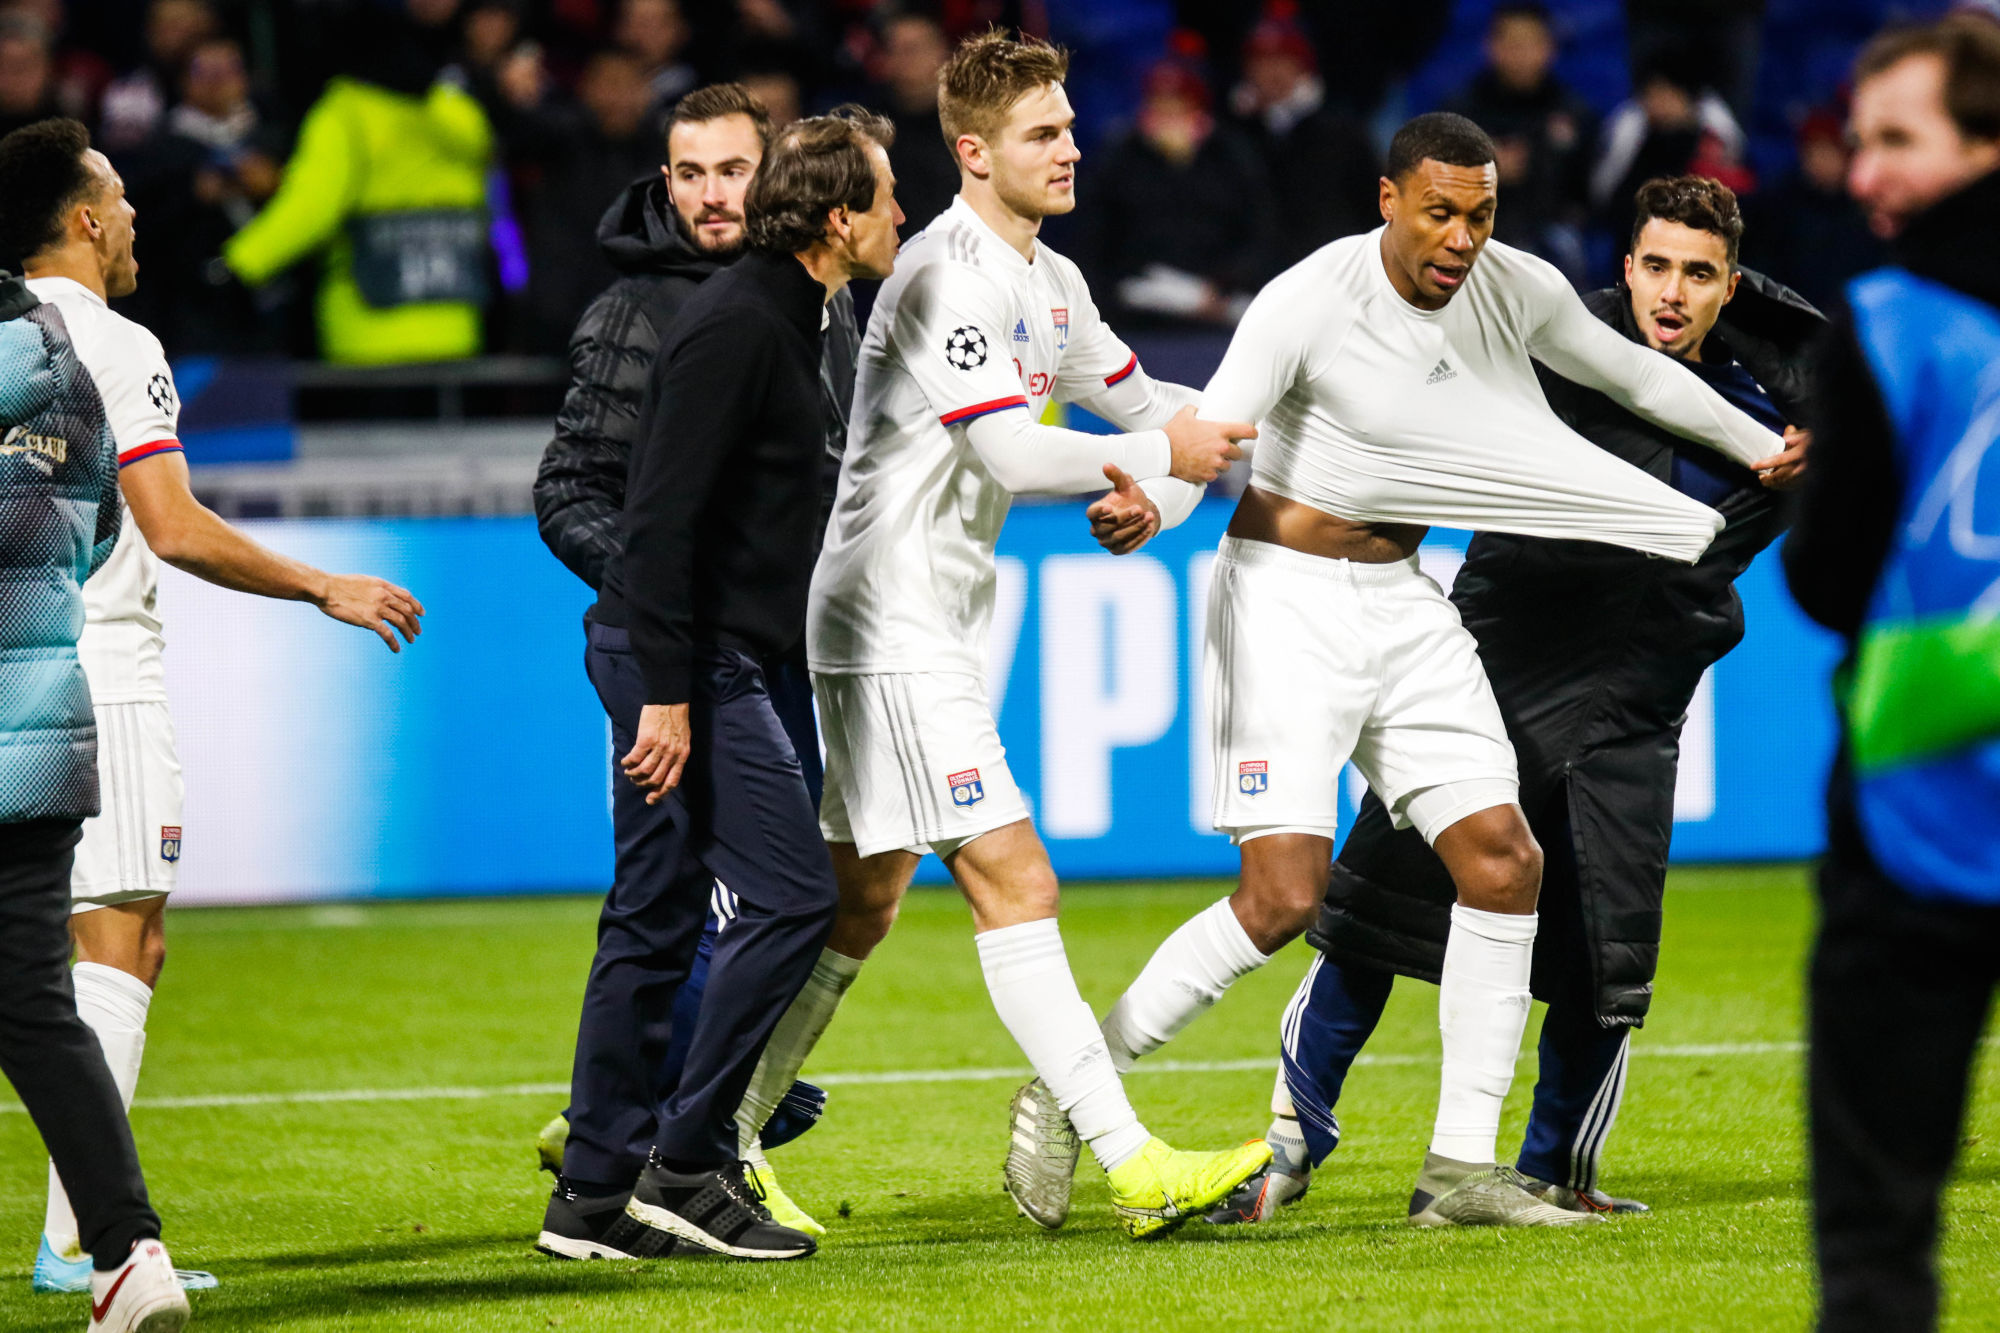 MARCELO, RAFAEL, Joachim ANDERSEN and Rudi GARCIA coach of Lyon after the altercation with the Lyon Fans during the Champions League match between Lyon and Leipzig at Groupama Stadium on December 10, 2019 in Lyon, France. (Photo by Romain Biard/Icon Sport) - Joachim ANDERSEN - Marcelo GUEDES FILHO - Rudi GARCIA - Rafael da SILVA - Groupama Stadium - Lyon (France)